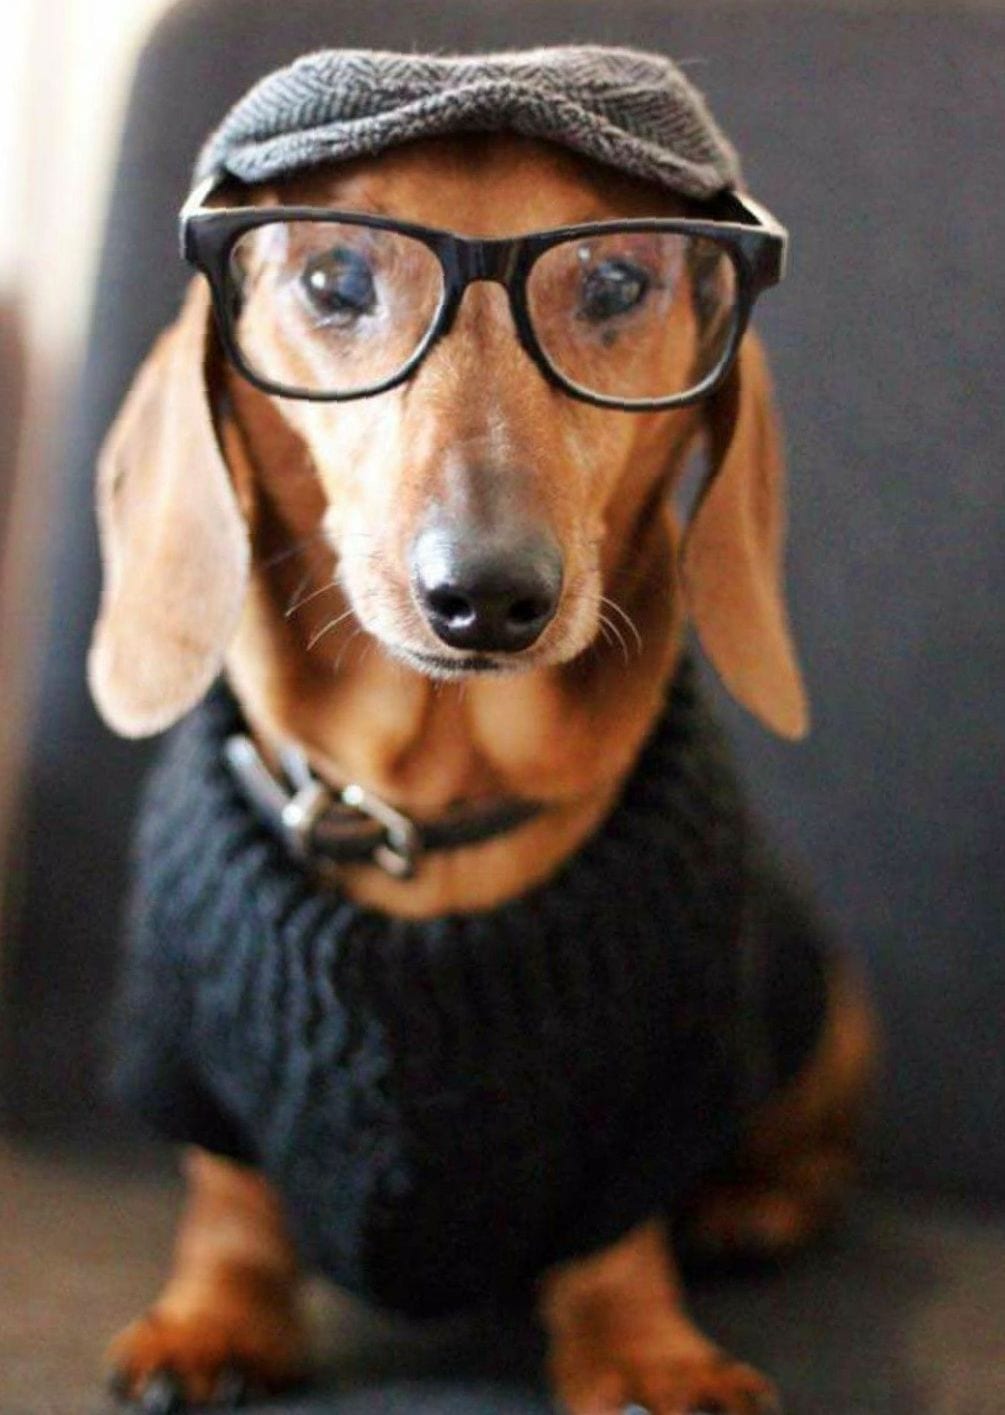 A Dachshund wearing a hat , glasses, and black sweater while sitting on the chair